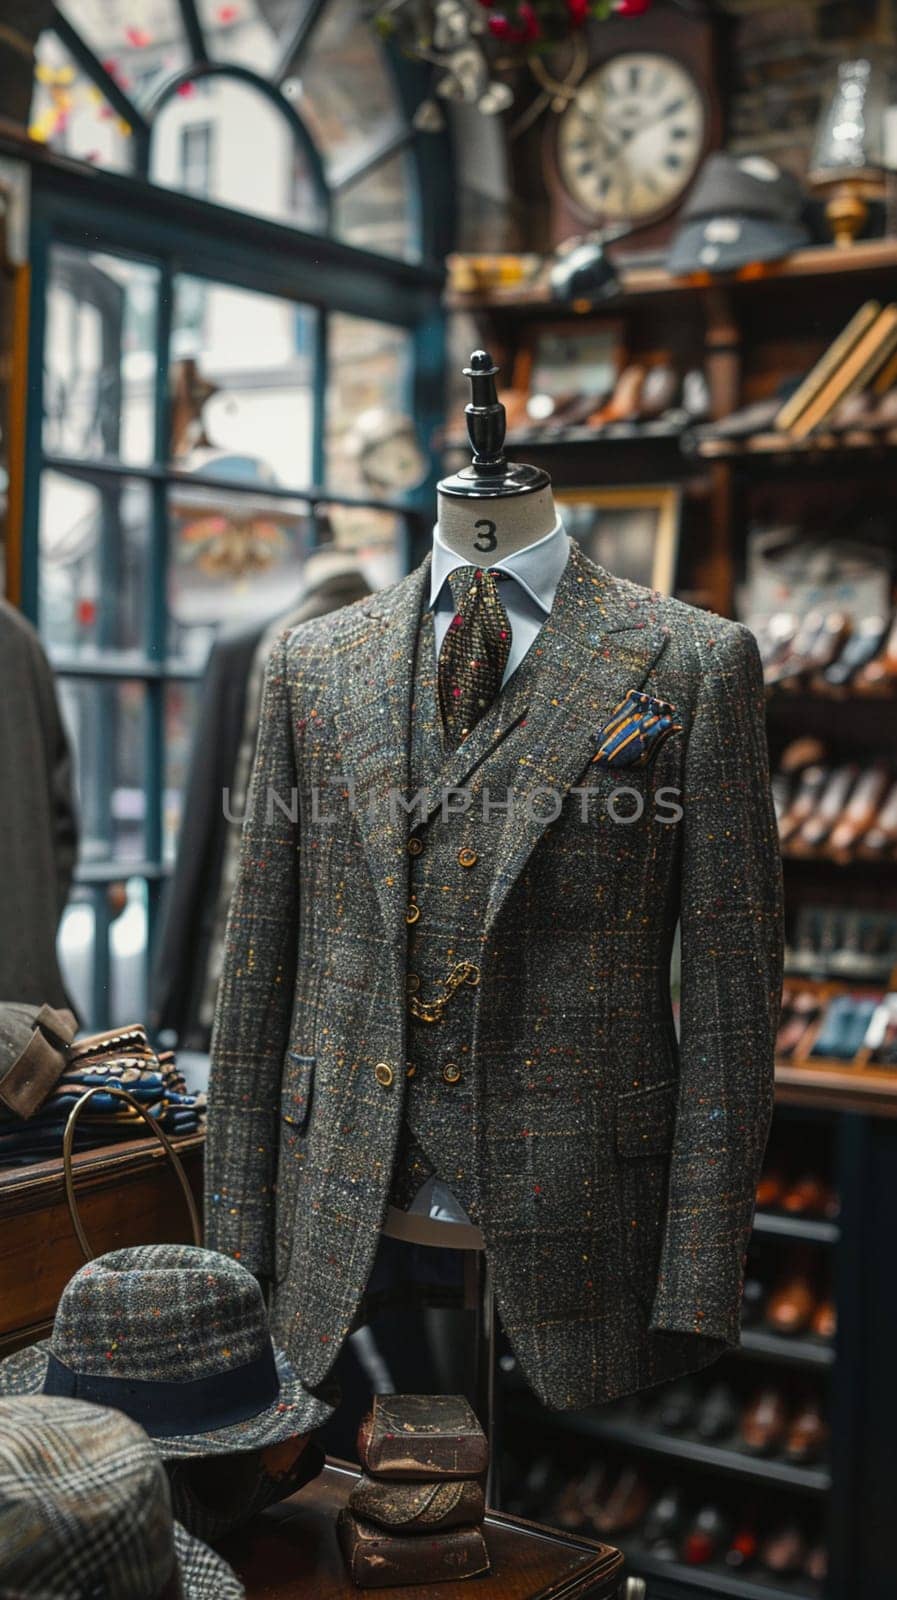 Bespoke Tailoring Atelier Crafts Signature Looks in Business of Personalized Fashion by Benzoix